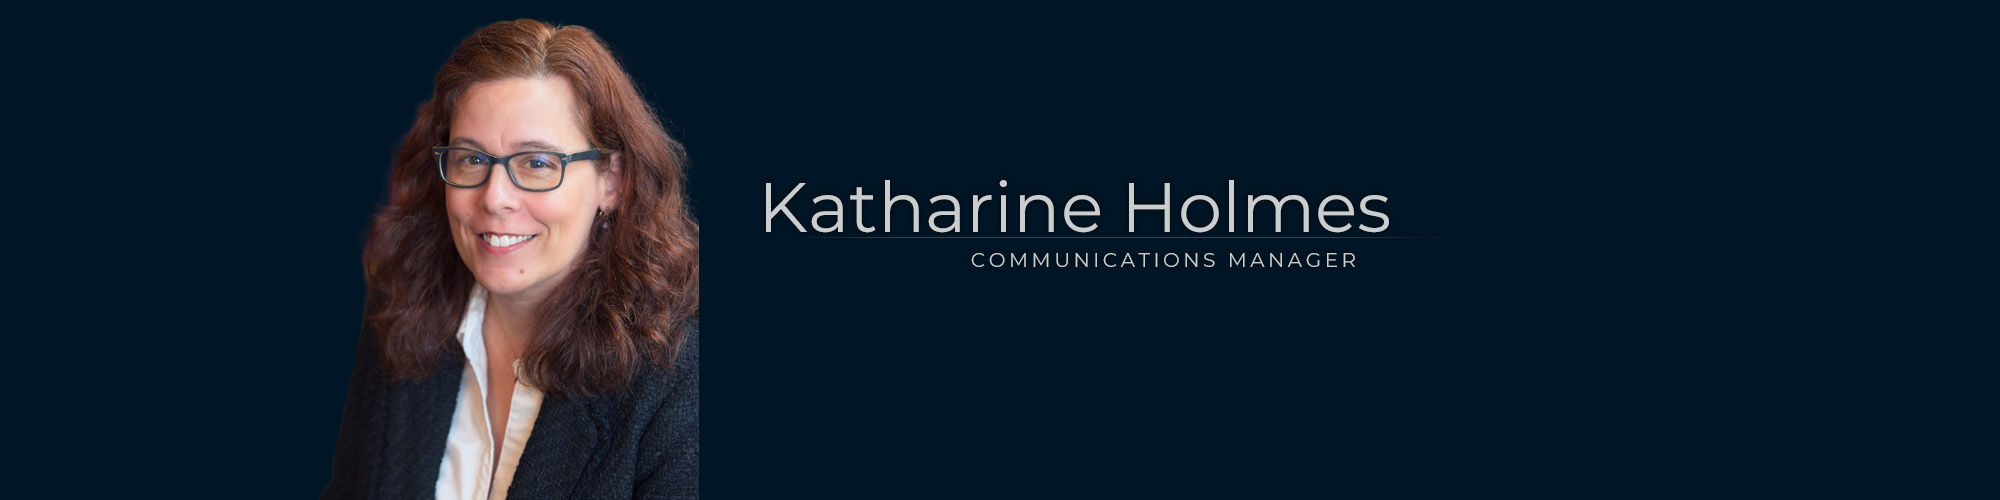 Katharine Holmes, Communications Manager at Dominion GovLaw LLP